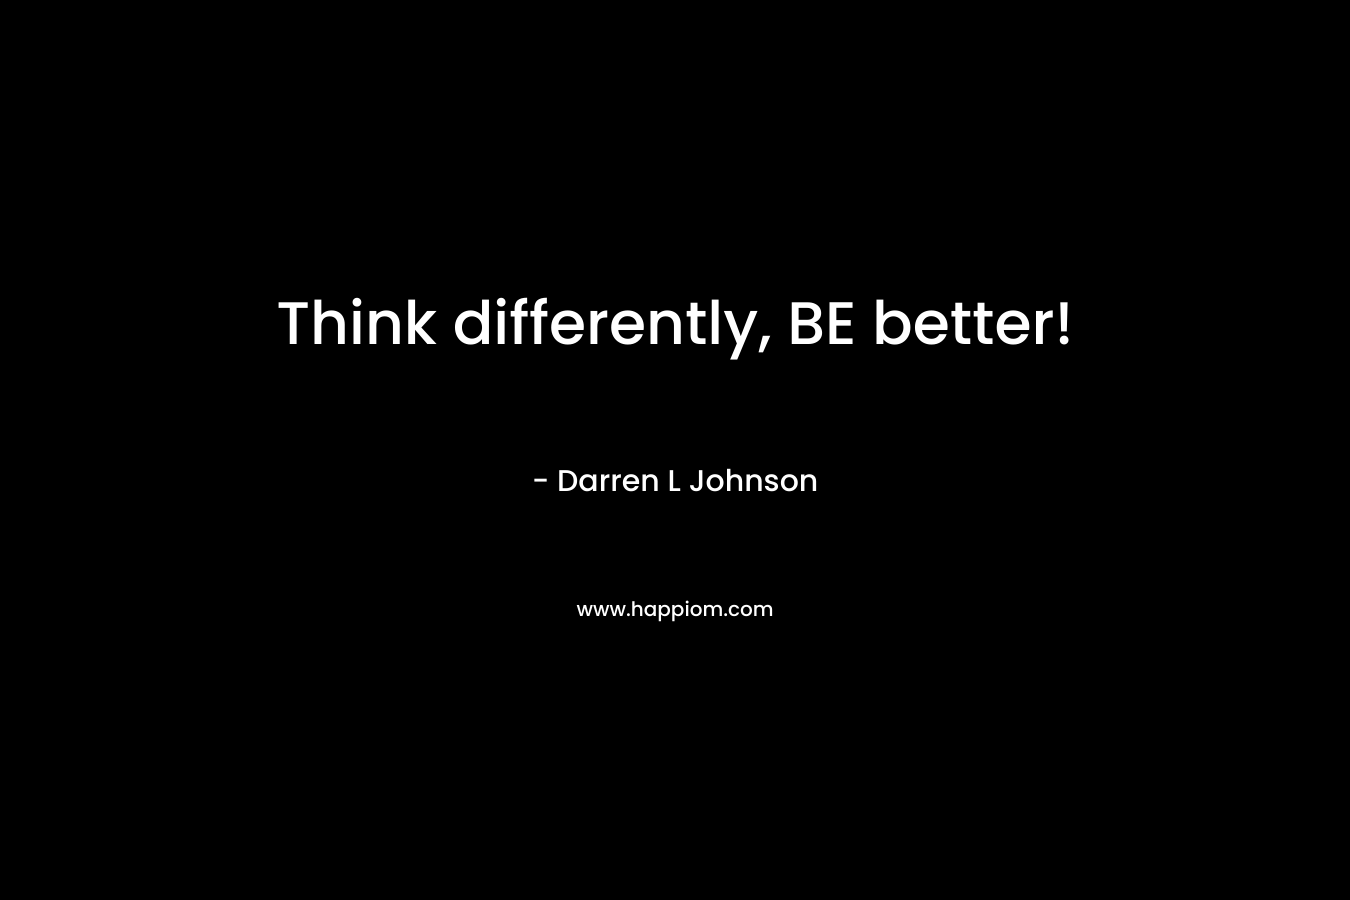 Think differently, BE better!